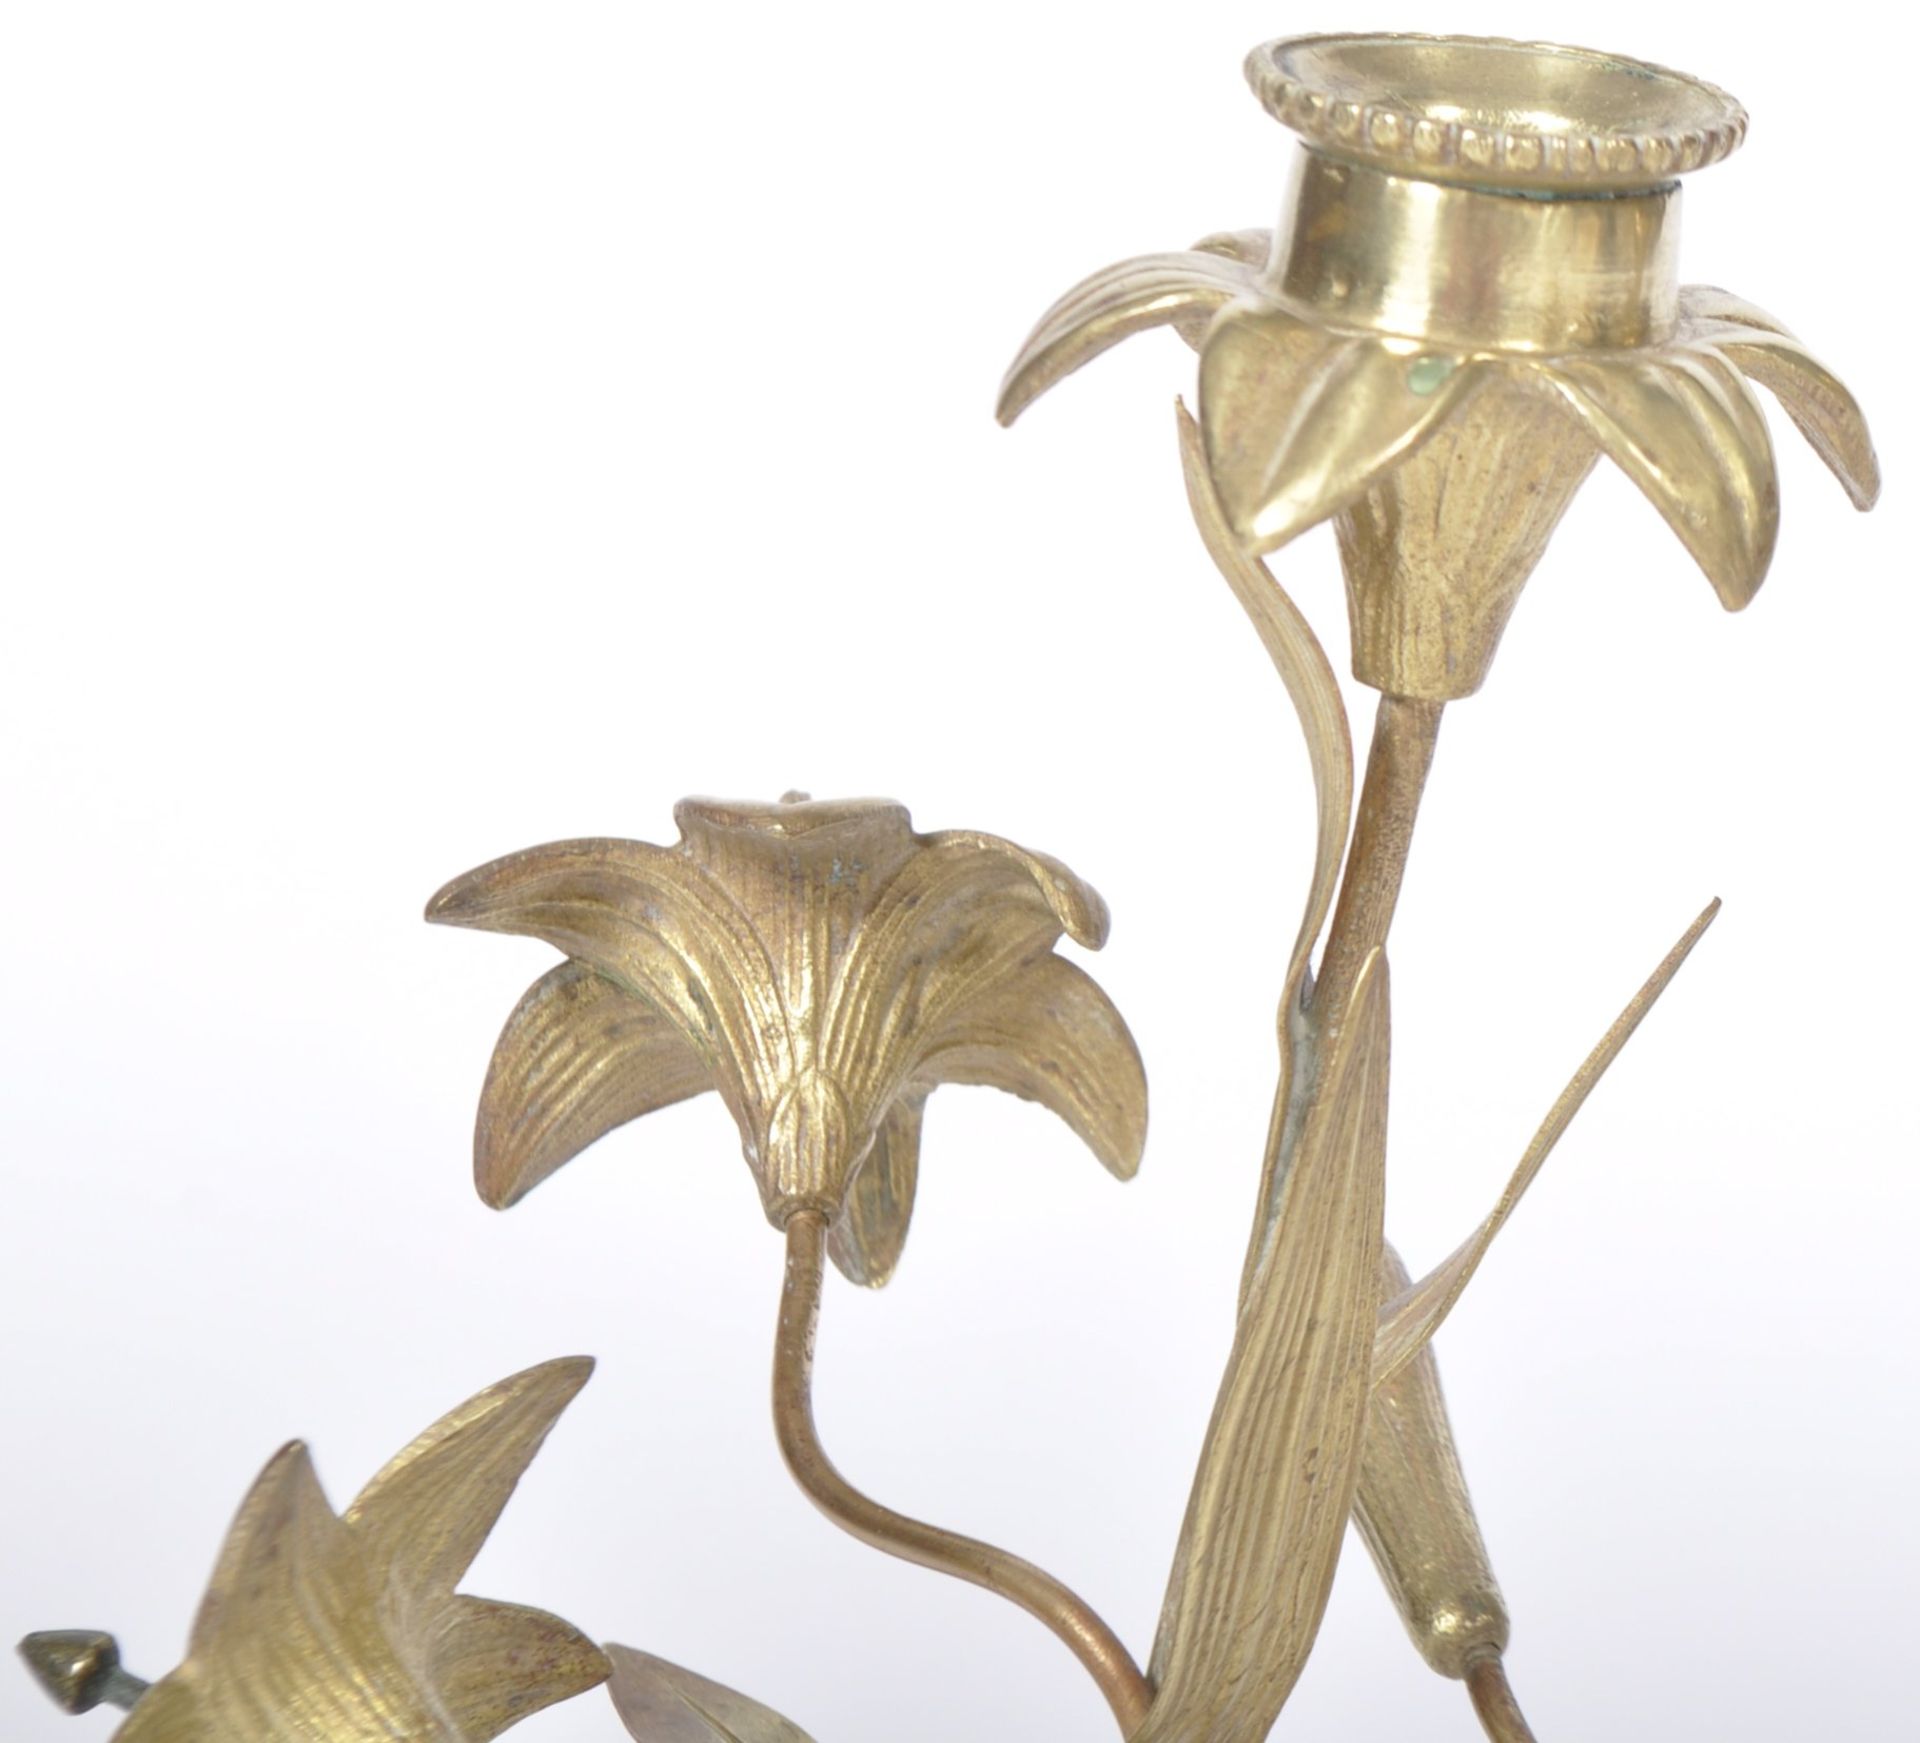 MATCHING PAIR OF 19TH CENTURY FRENCH BRASS CANDLESTICKS - Image 2 of 7